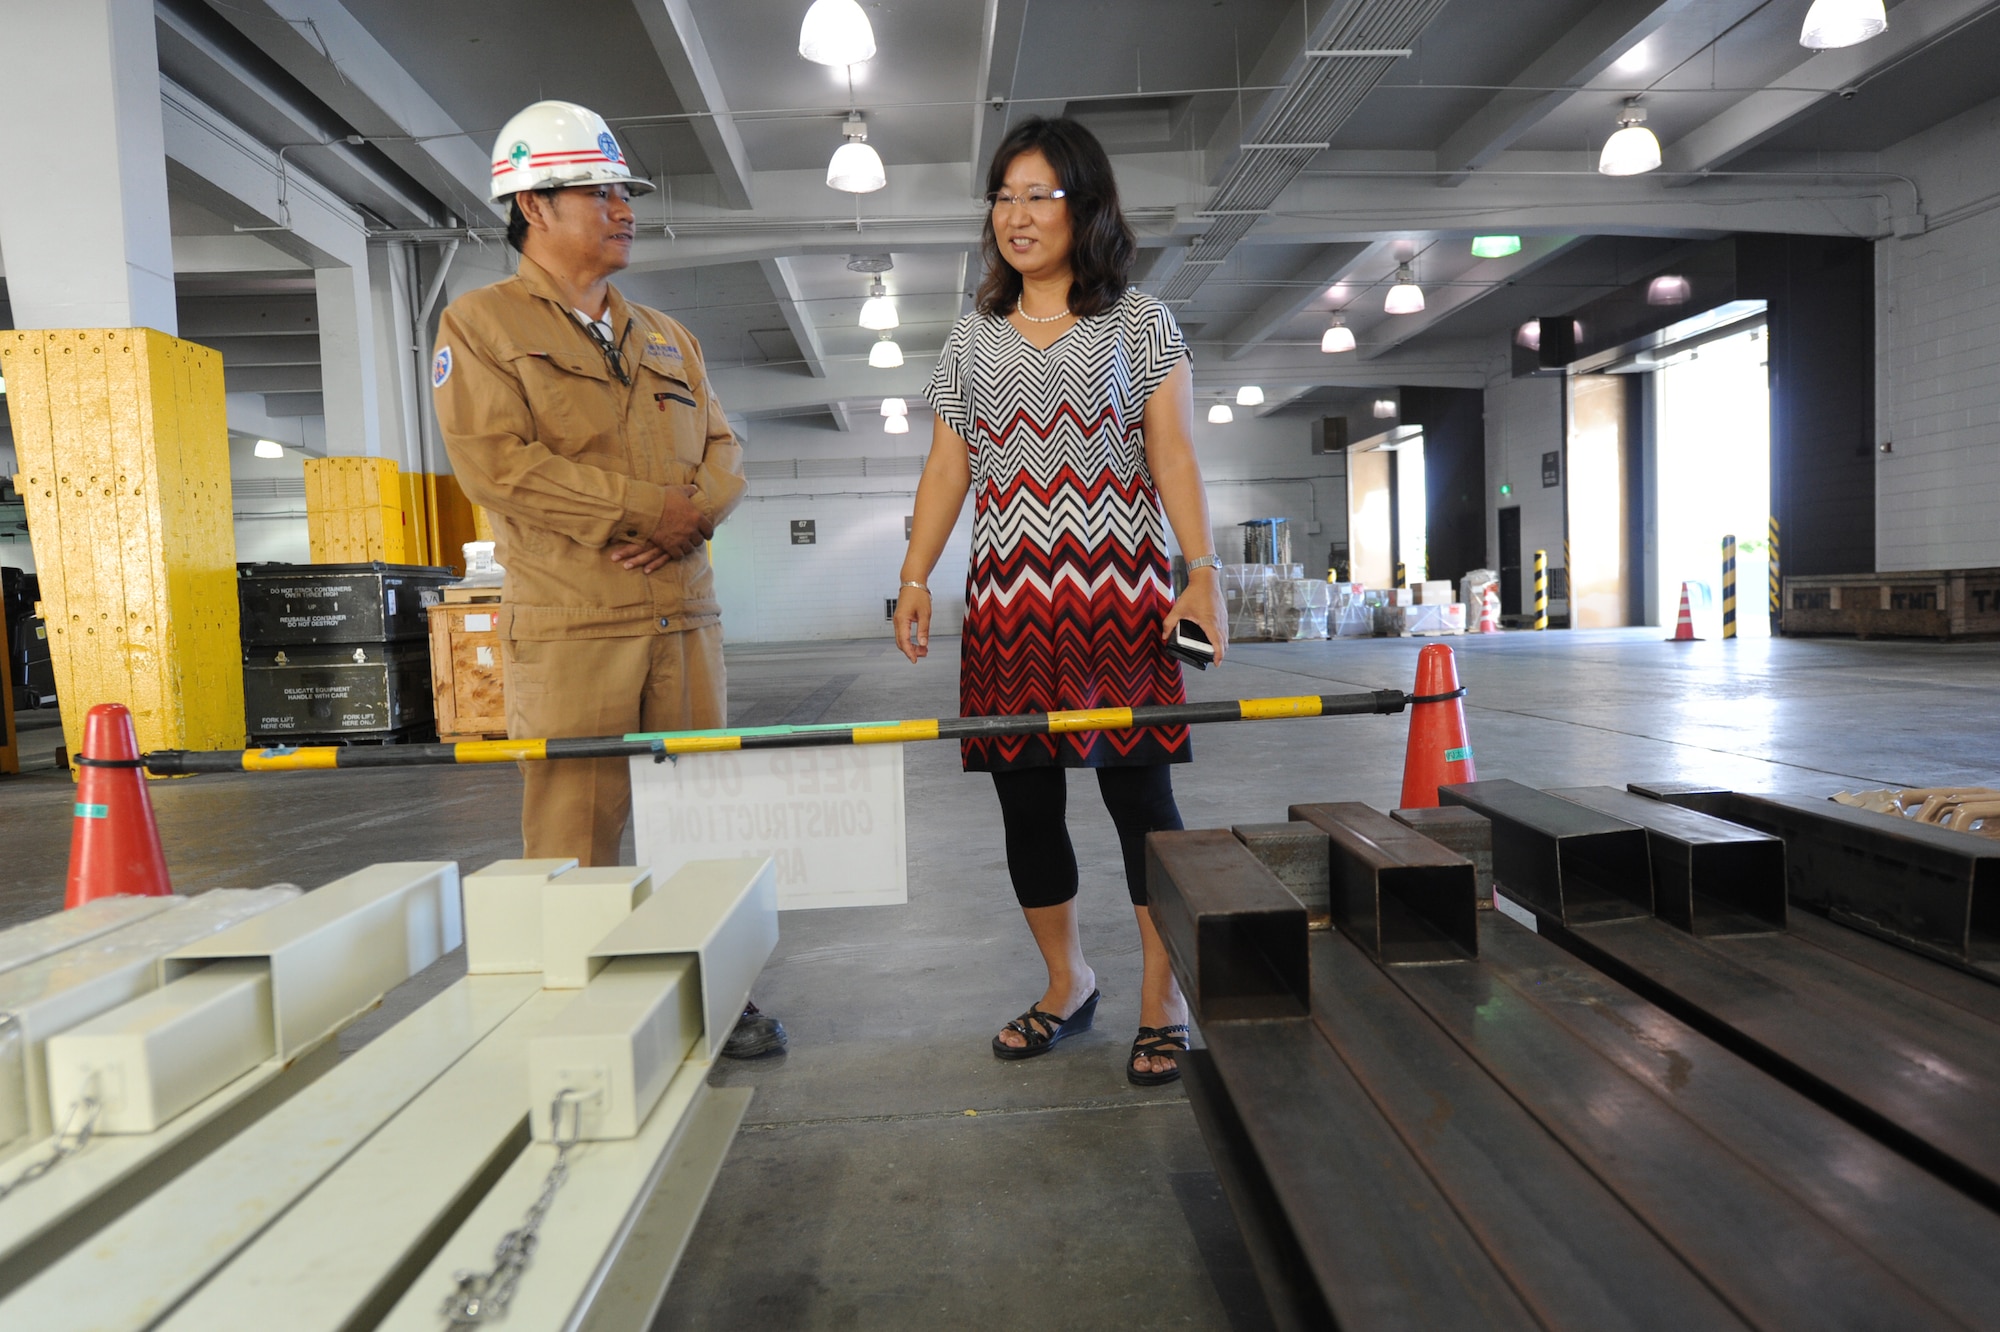 John Guadalupe, 733rd Air Mobility Squadron quality control manager (left), speaks with Keiko Okuhara, 733rd AMS facility manager (right), about reordering and replacing of the typhoon bars seen below on Kadena Air Base, Japan, Sept. 24, 2014. One of the 733rd AMS's responsibilities is the building updates to include safety such as these reinforcing bars for the roll down doors. (U.S. Air Force photo by Airmen 1st Class Zackary A. Henry/Released)